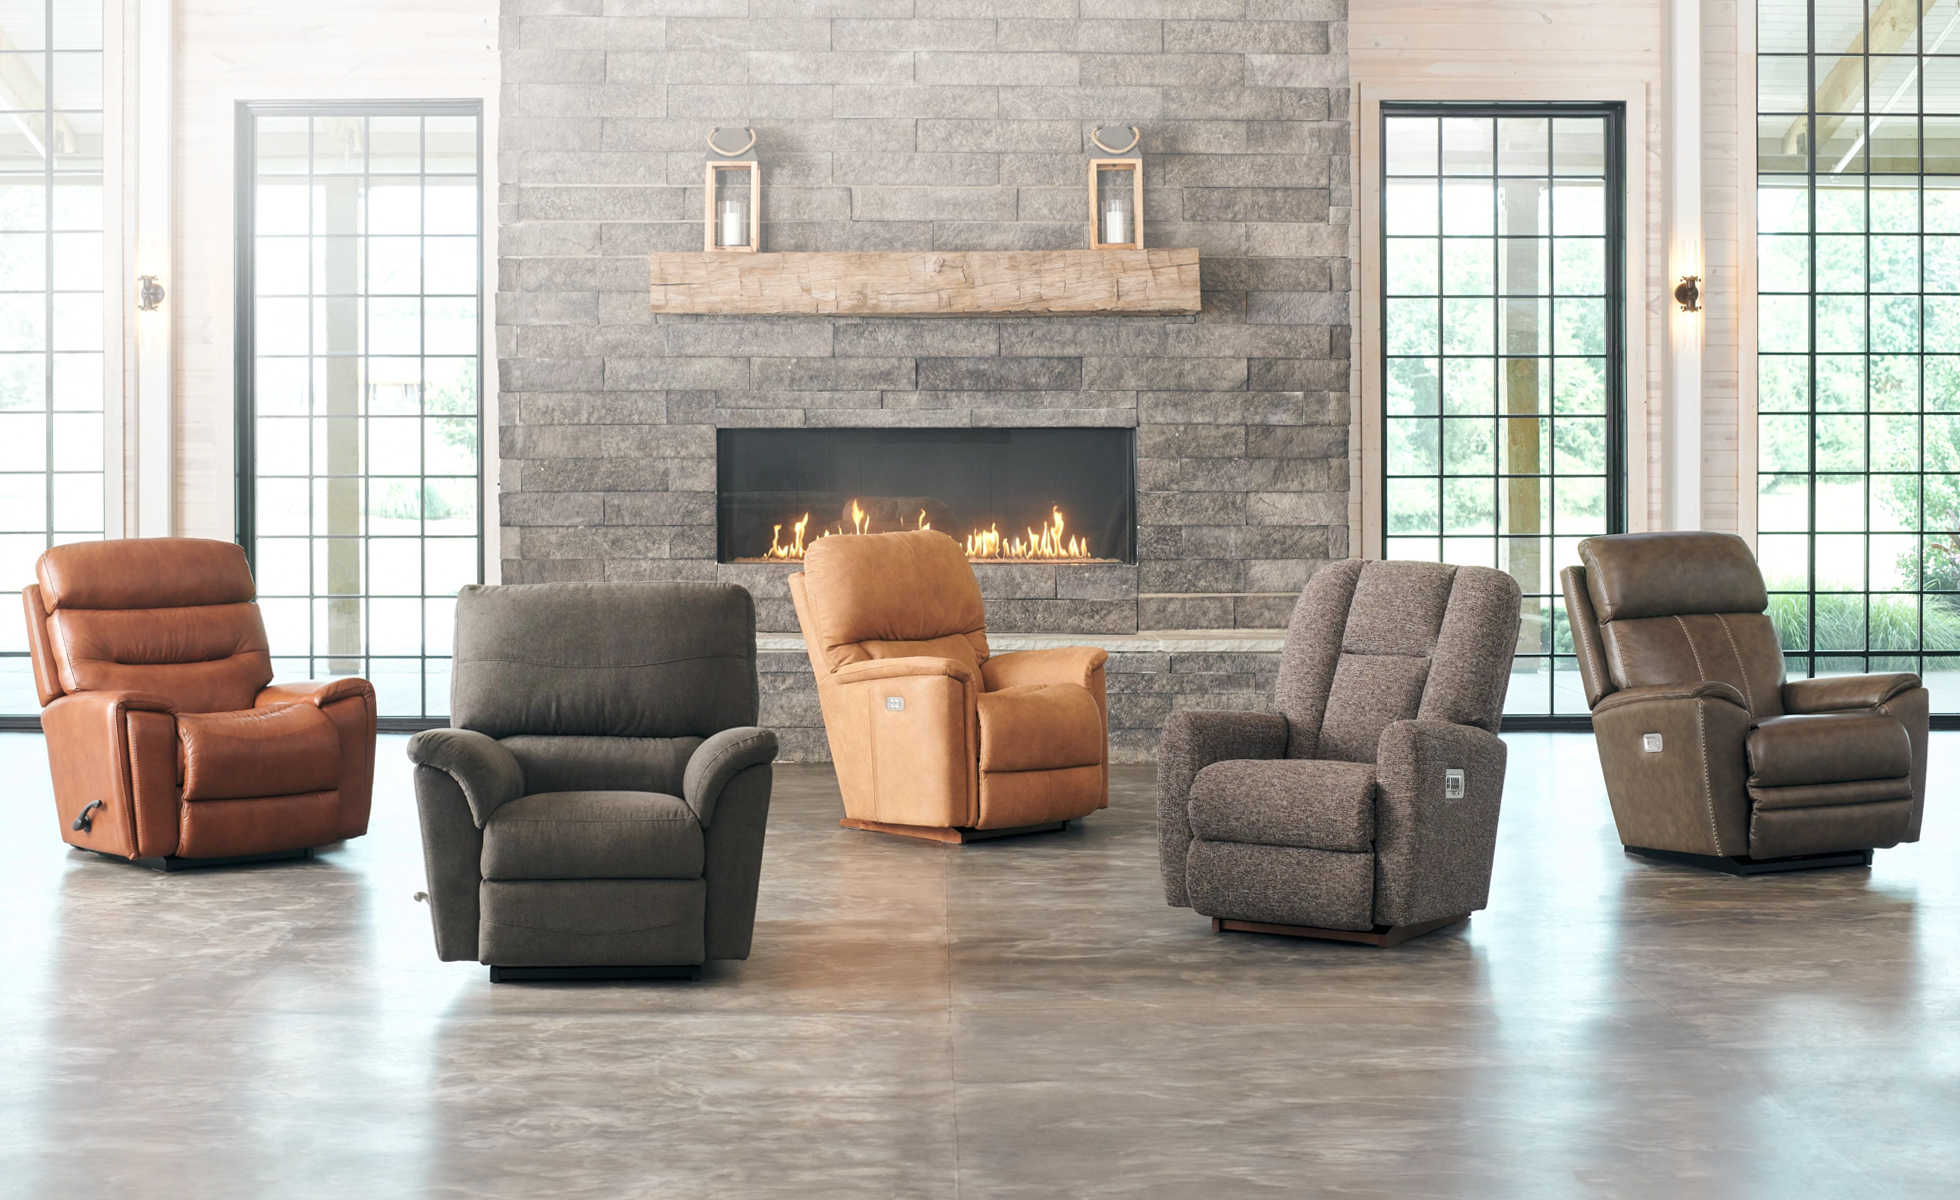 5 Best-Selling Recliners – Reviews, Features and Shopping